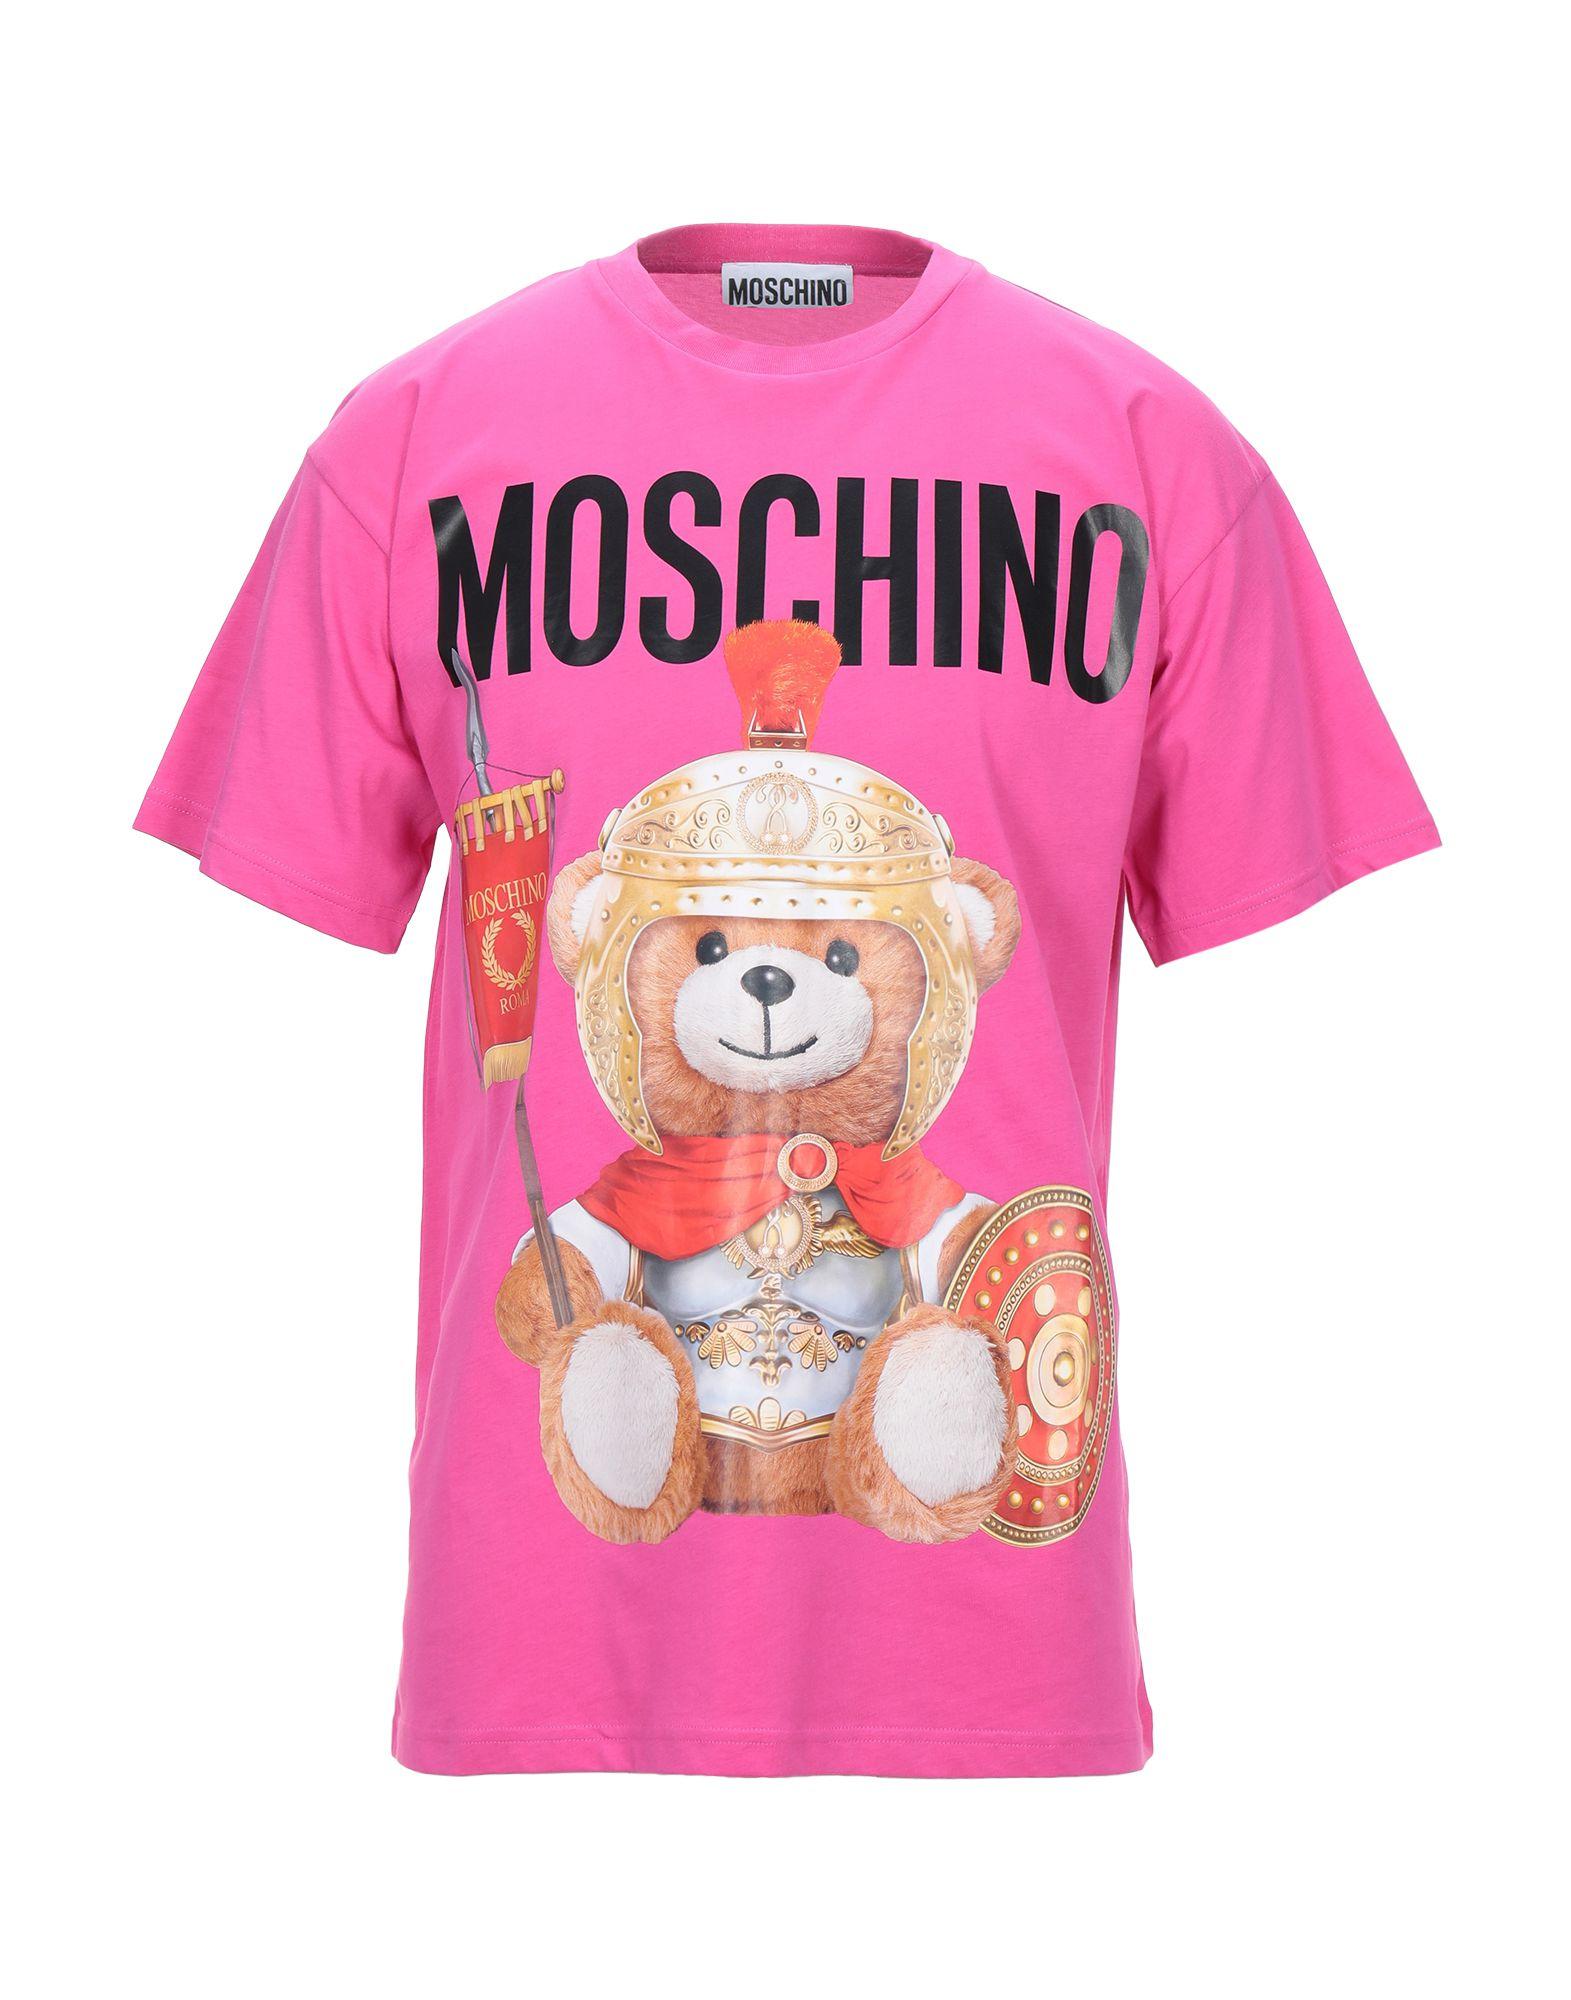 Moschino Cotton T-shirt in Fuchsia (Pink) for Men - Lyst